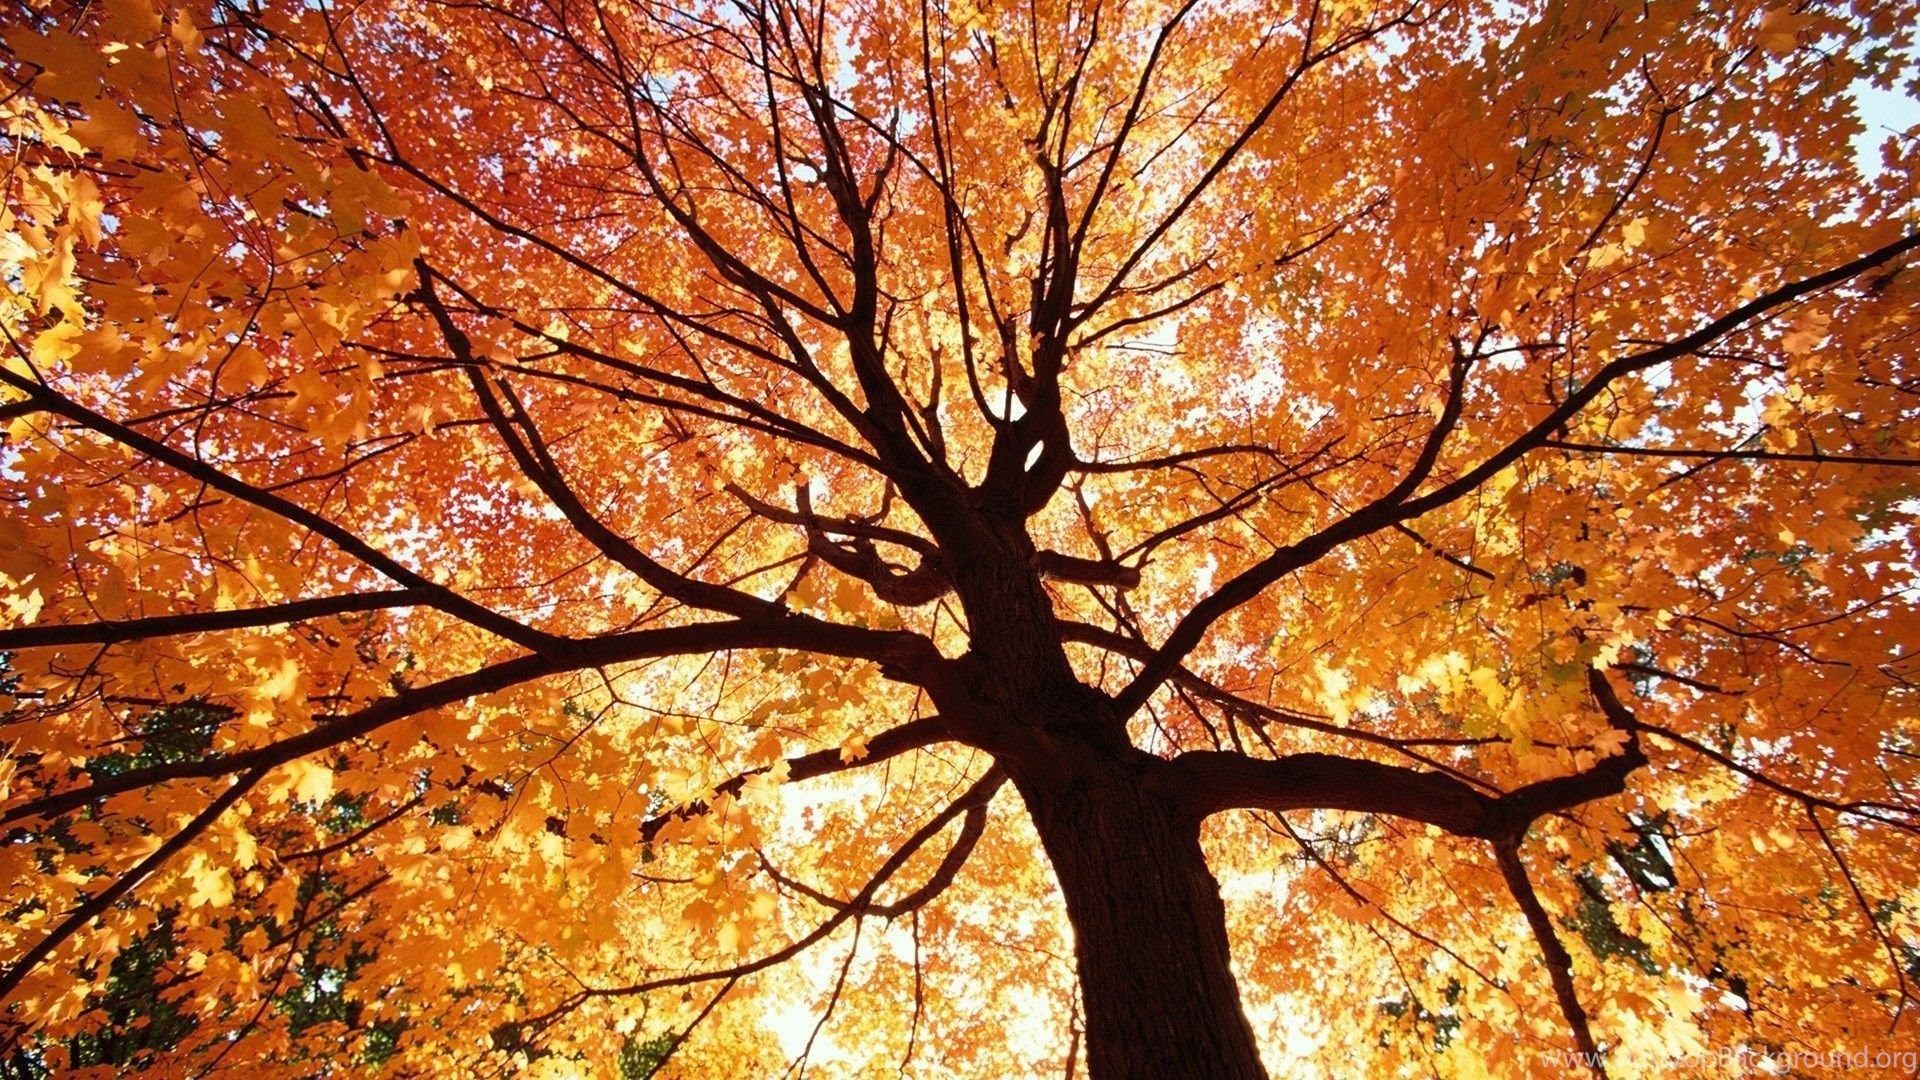 Top Autumn Trees I Want Image For Desktop Background